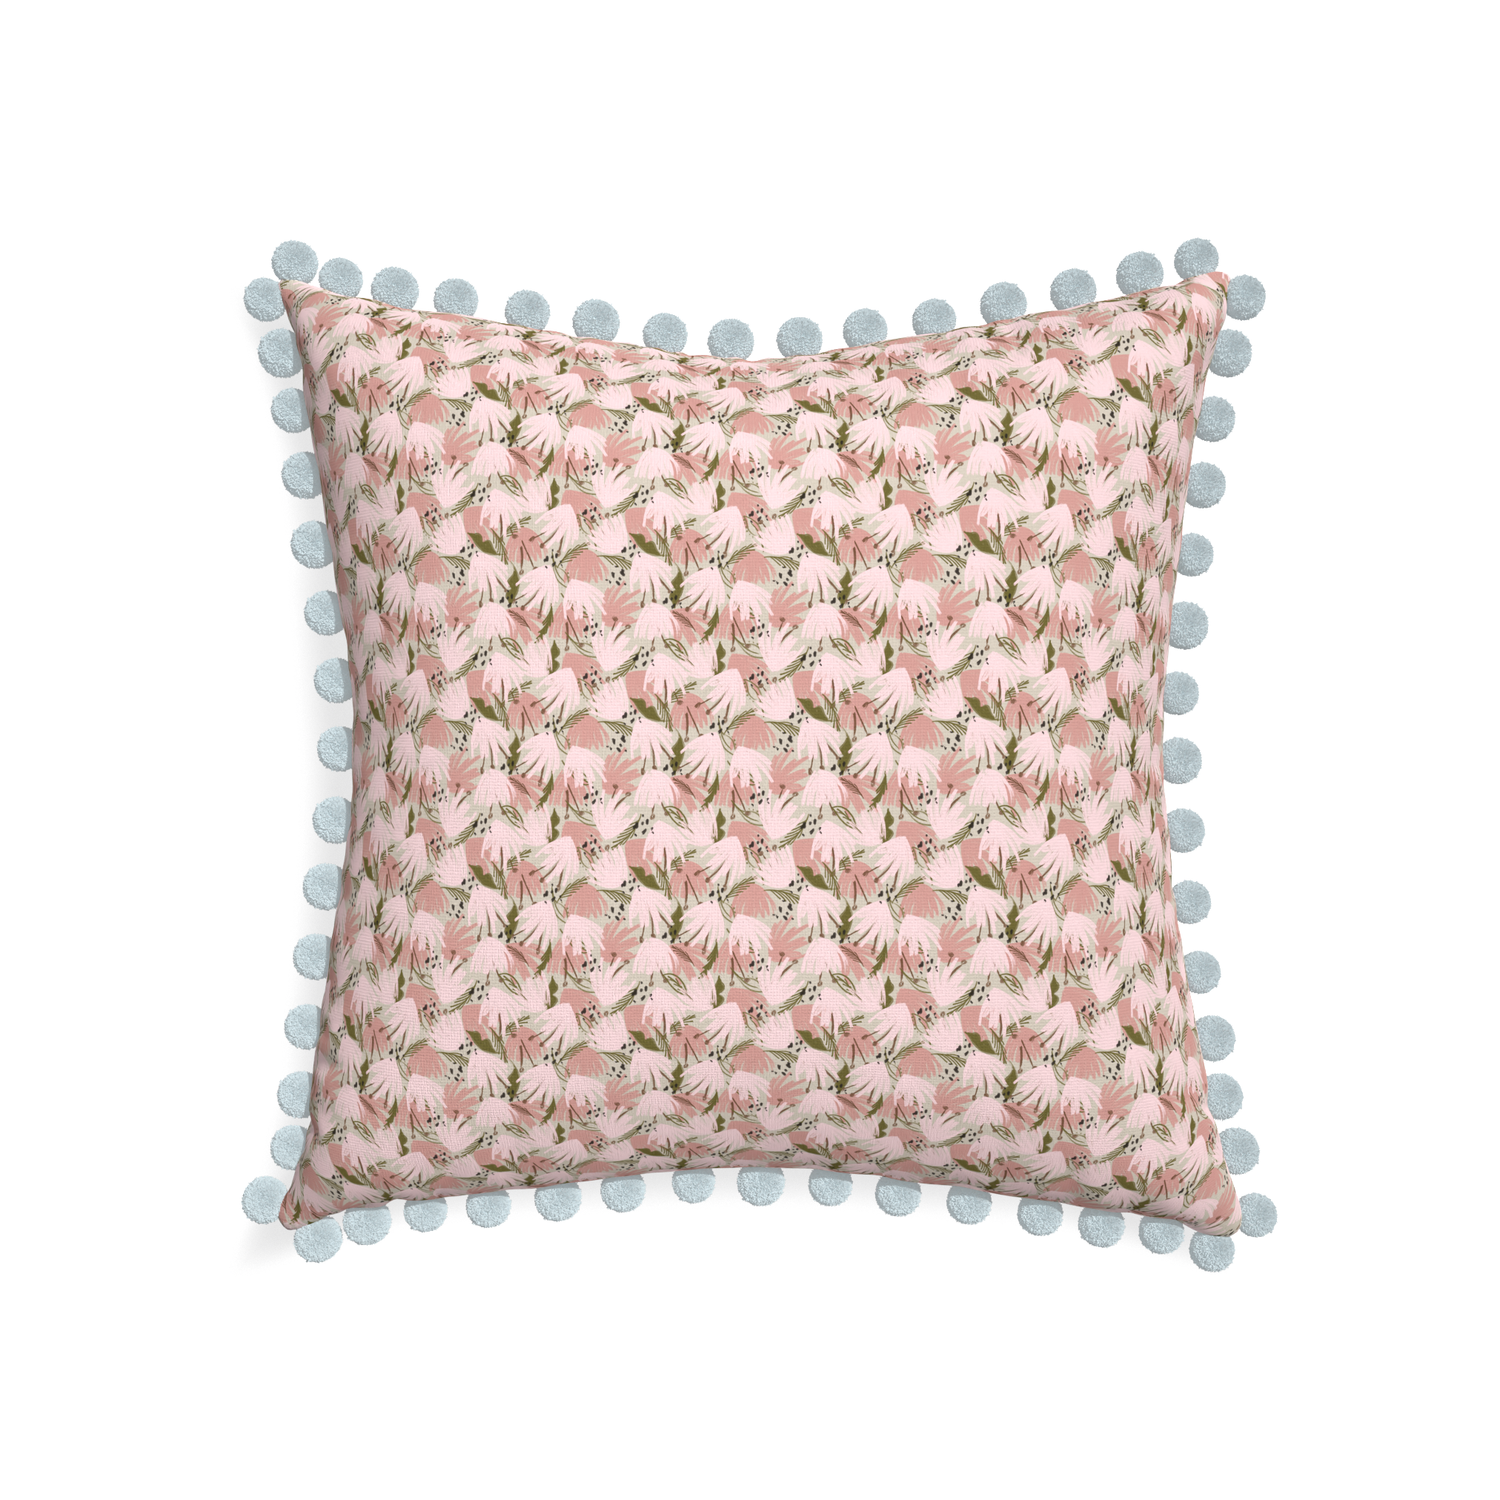 22-square eden pink custom pink floralpillow with powder pom pom on white background